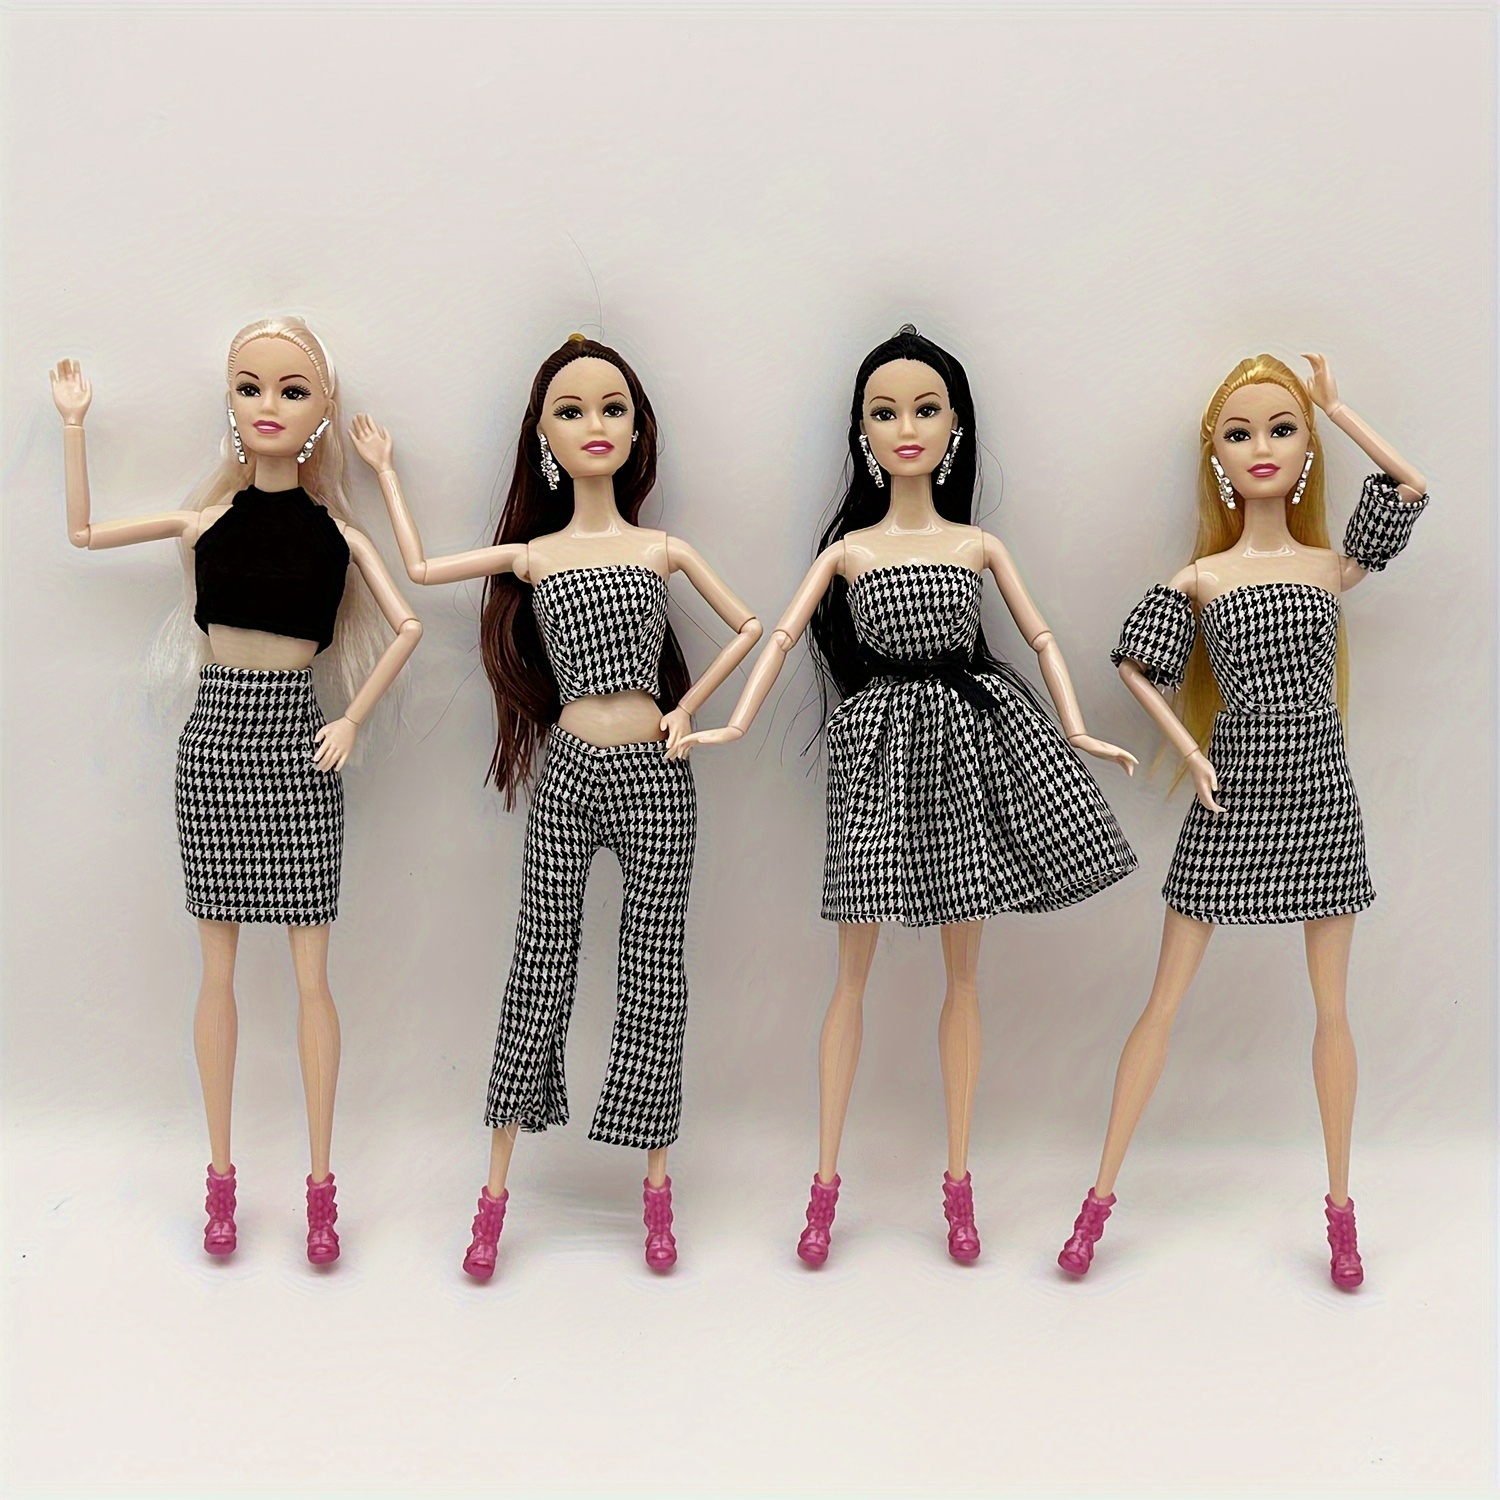 

30cm Hand Joint Movable Plaid Fashion Doll Children's Holiday Gift, Suitable For All Holiday Gifts